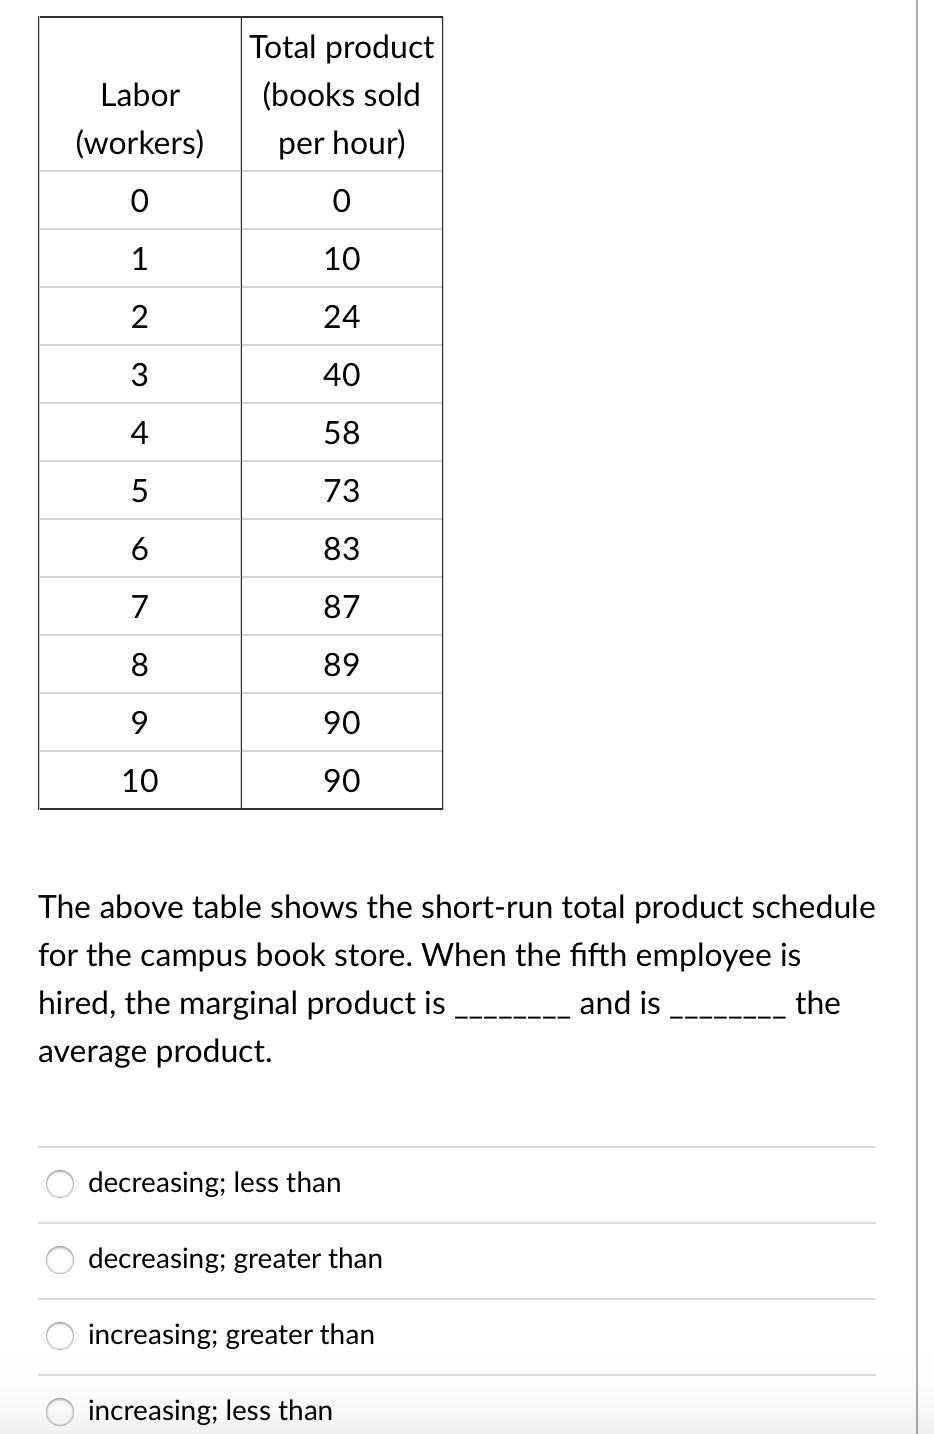 Total product
Labor
(books sold
(workers)
per hour)
1
10
2
24
3
40
4
58
5
73
6
83
7
87
8
89
90
10
90
The above table shows the short-run total product schedule
for the campus book store. When the fifth employee is
hired, the marginal product is
and is
the
average product.
decreasing; less than
decreasing; greater than
increasing; greater than
increasing; less than
